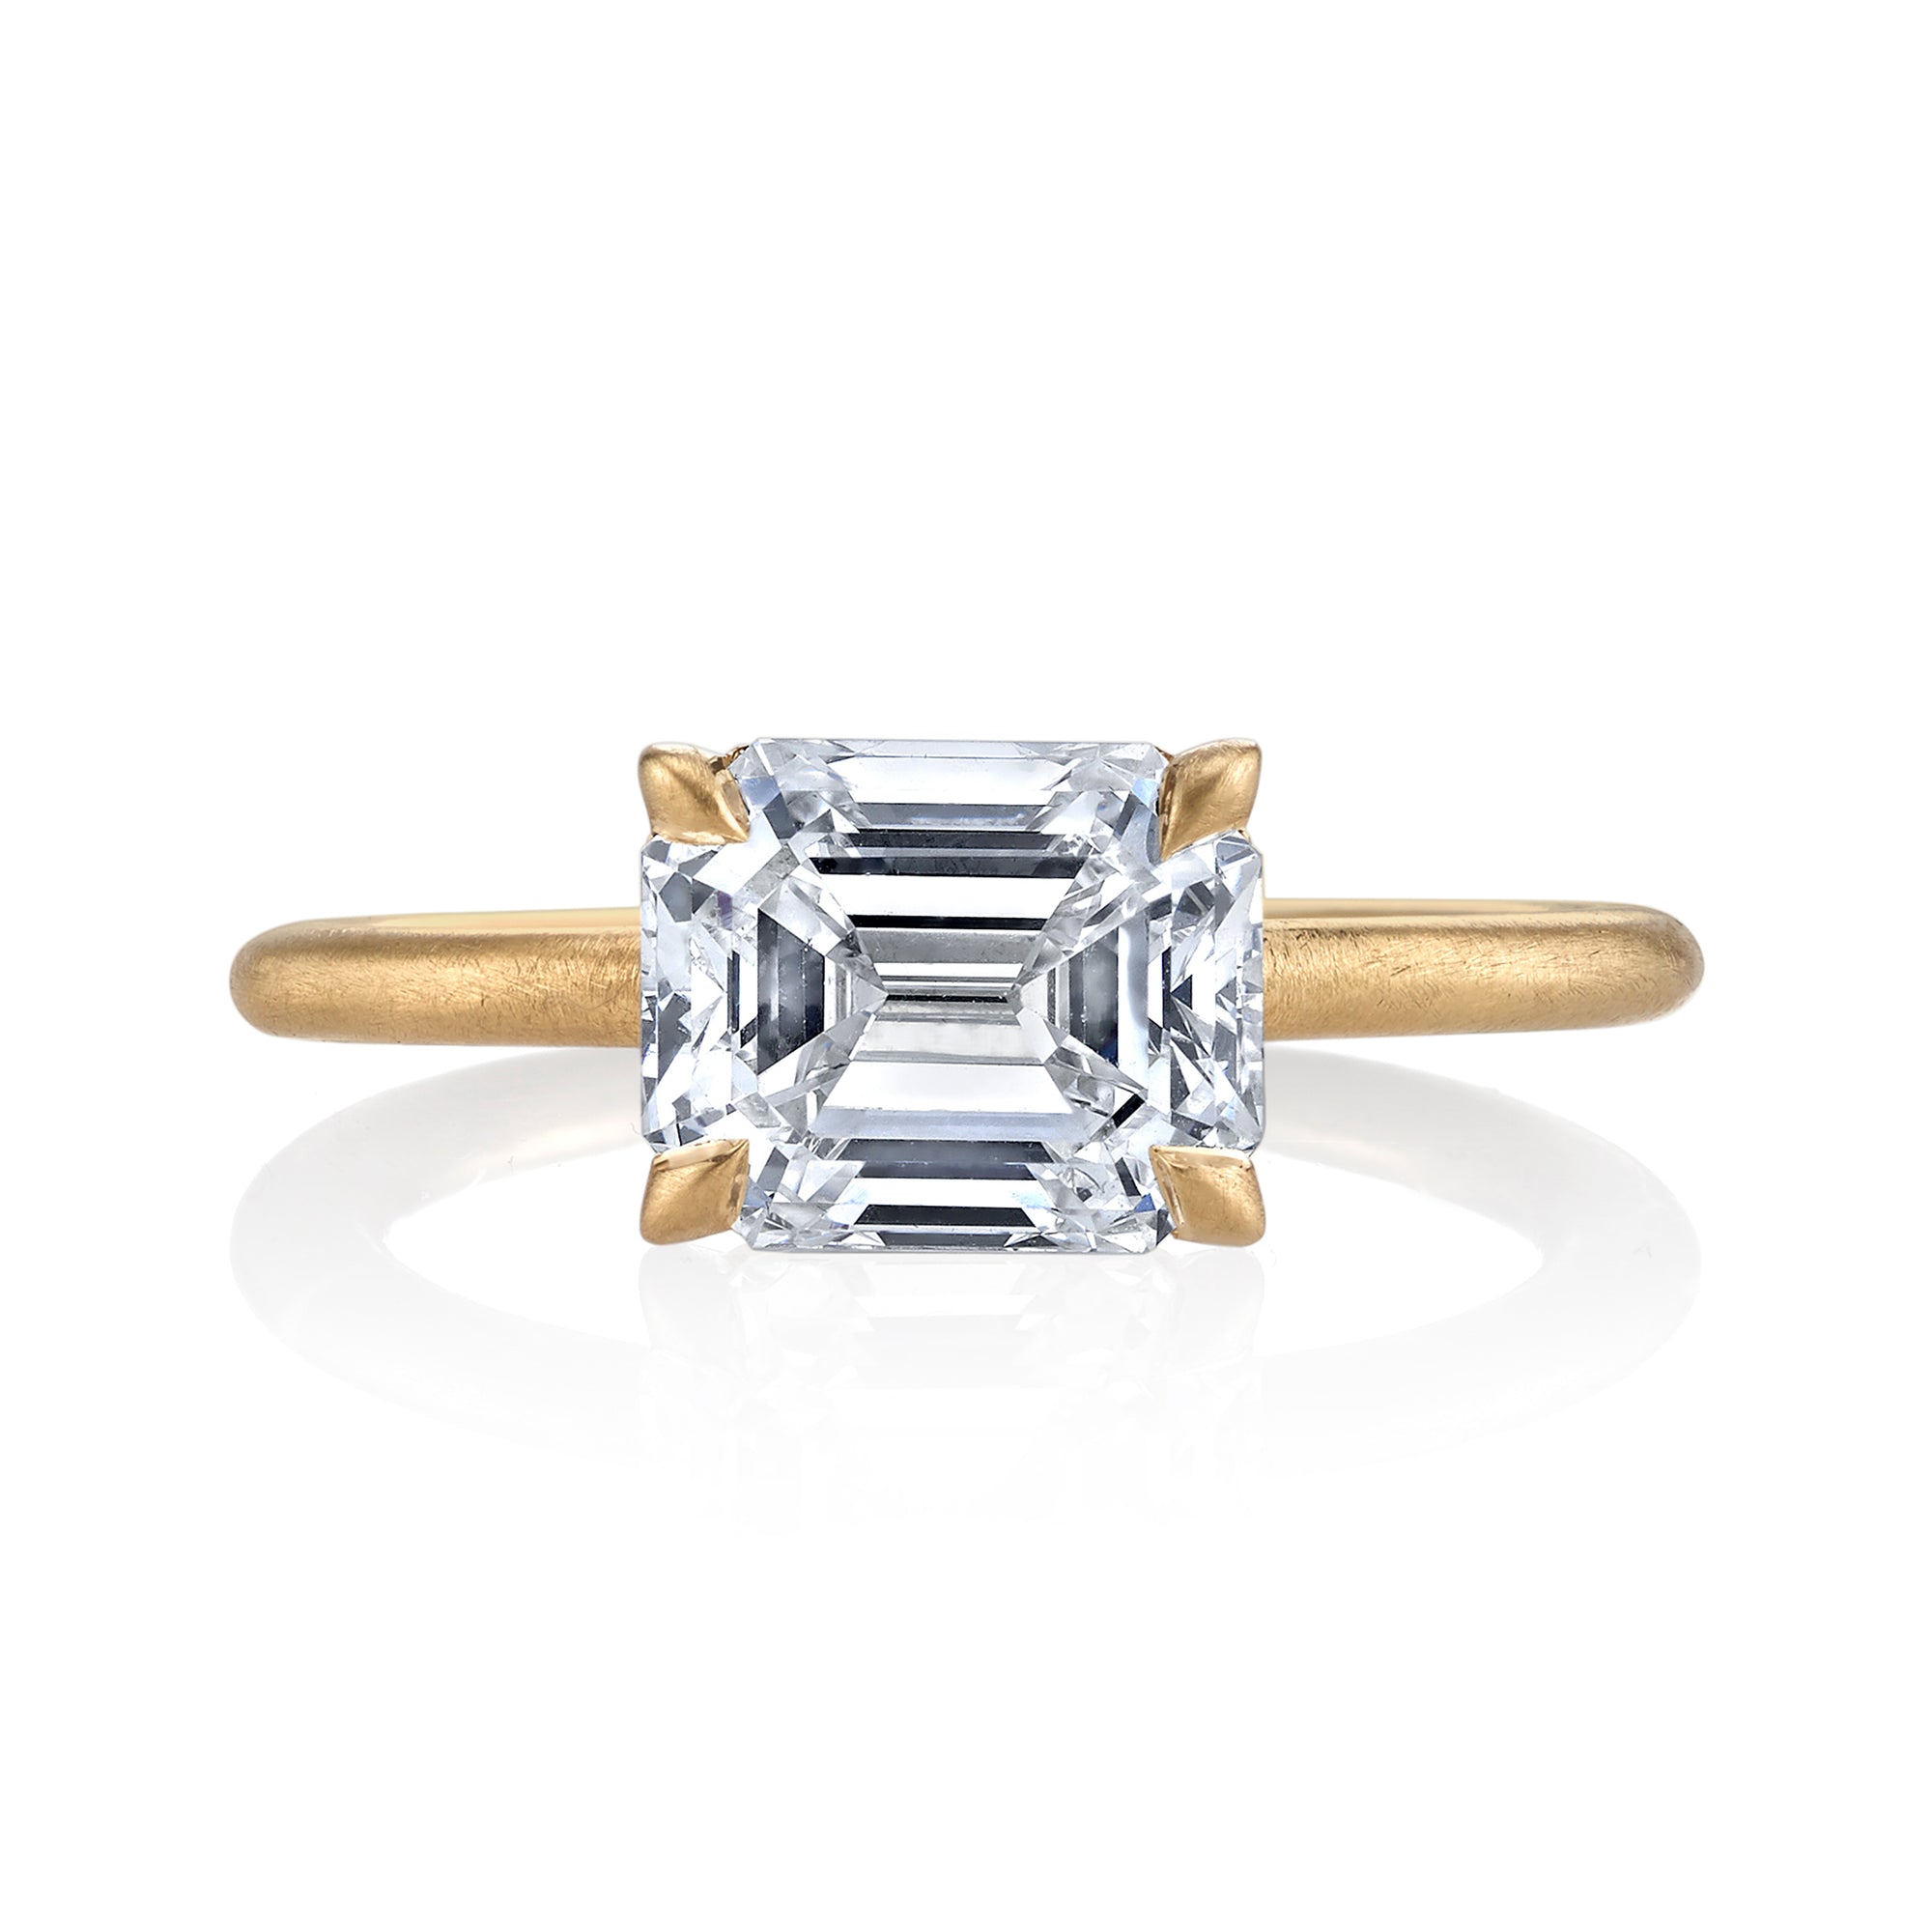 East/West Emerald Cut Diamond with Satin Finish Band